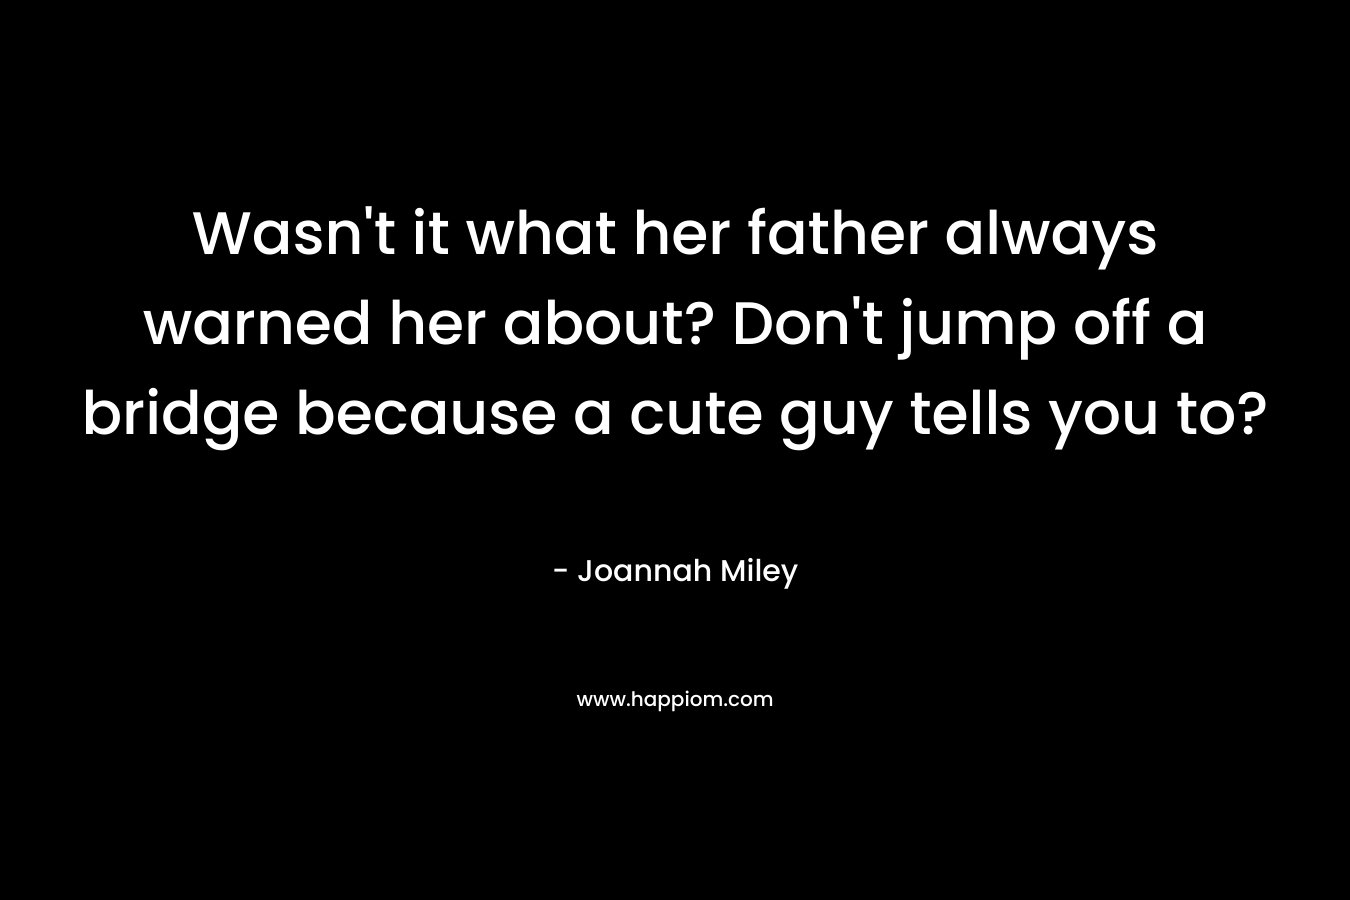 Wasn’t it what her father always warned her about? Don’t jump off a bridge because a cute guy tells you to? – Joannah Miley